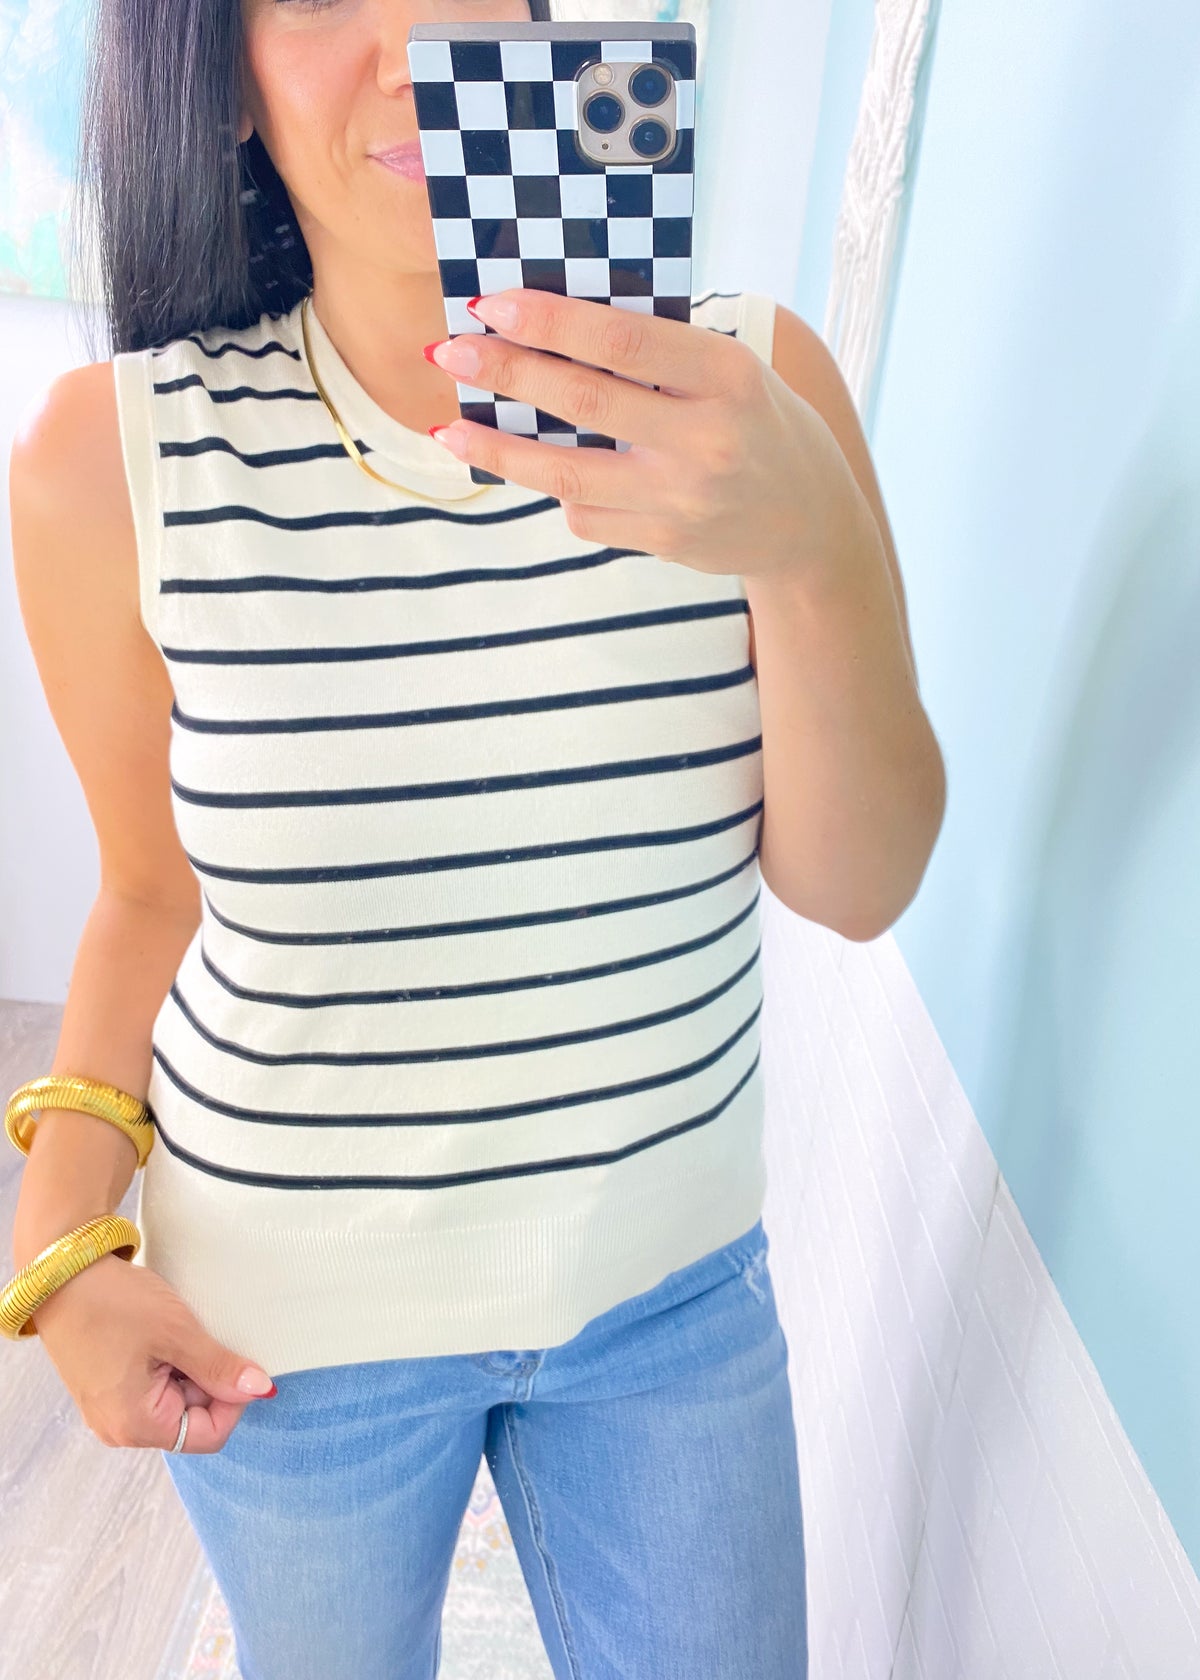 'The Boardwalk' Ivory & Black Stripe Knit Sleeveless Top-This striped knit tank is the definition of effortlessly chic! The soft and luxurious knit fabric is perfect to dress up or wear casual. A great layering top for work &amp; Summer time staple!-Cali Moon Boutique, Plainville Connecticut